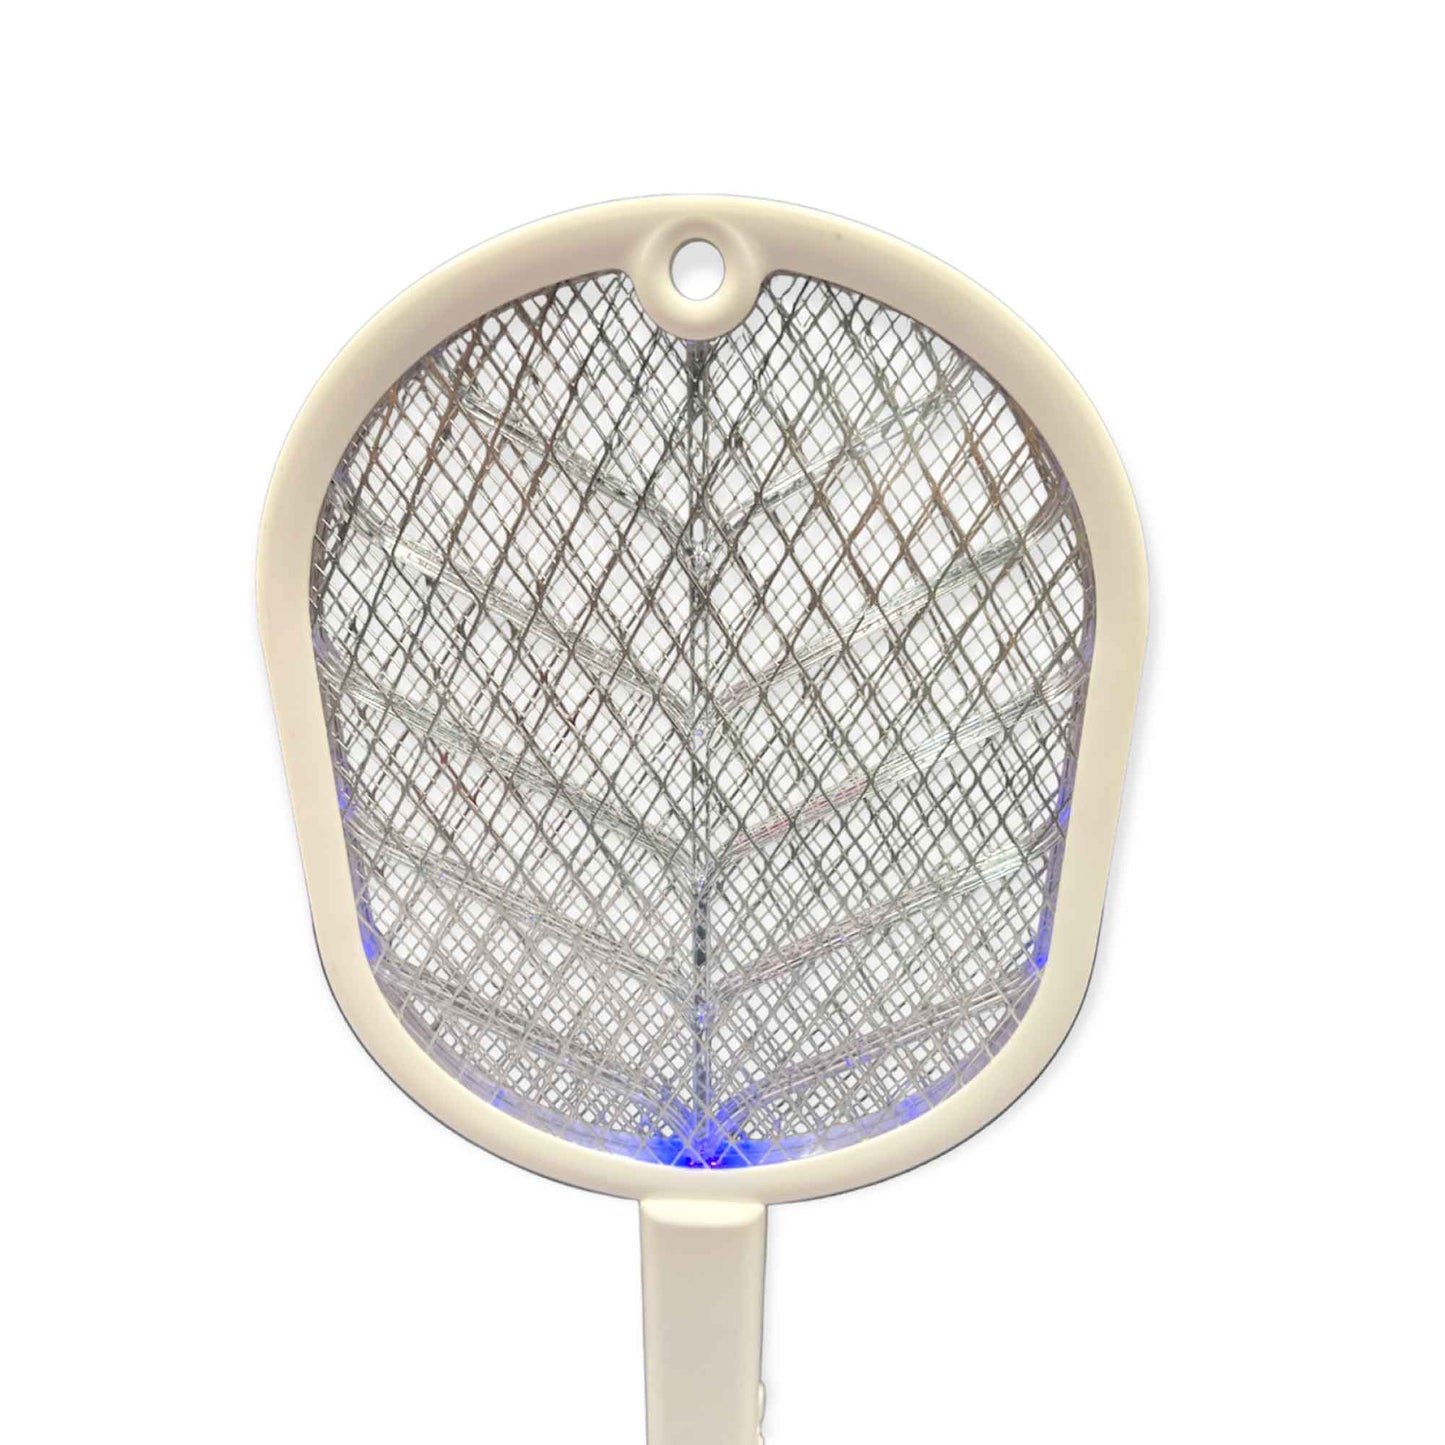 2 in 1 Rechargeable Mosquito Swatter - Electronic Fly Insect Bug Zapper Racket